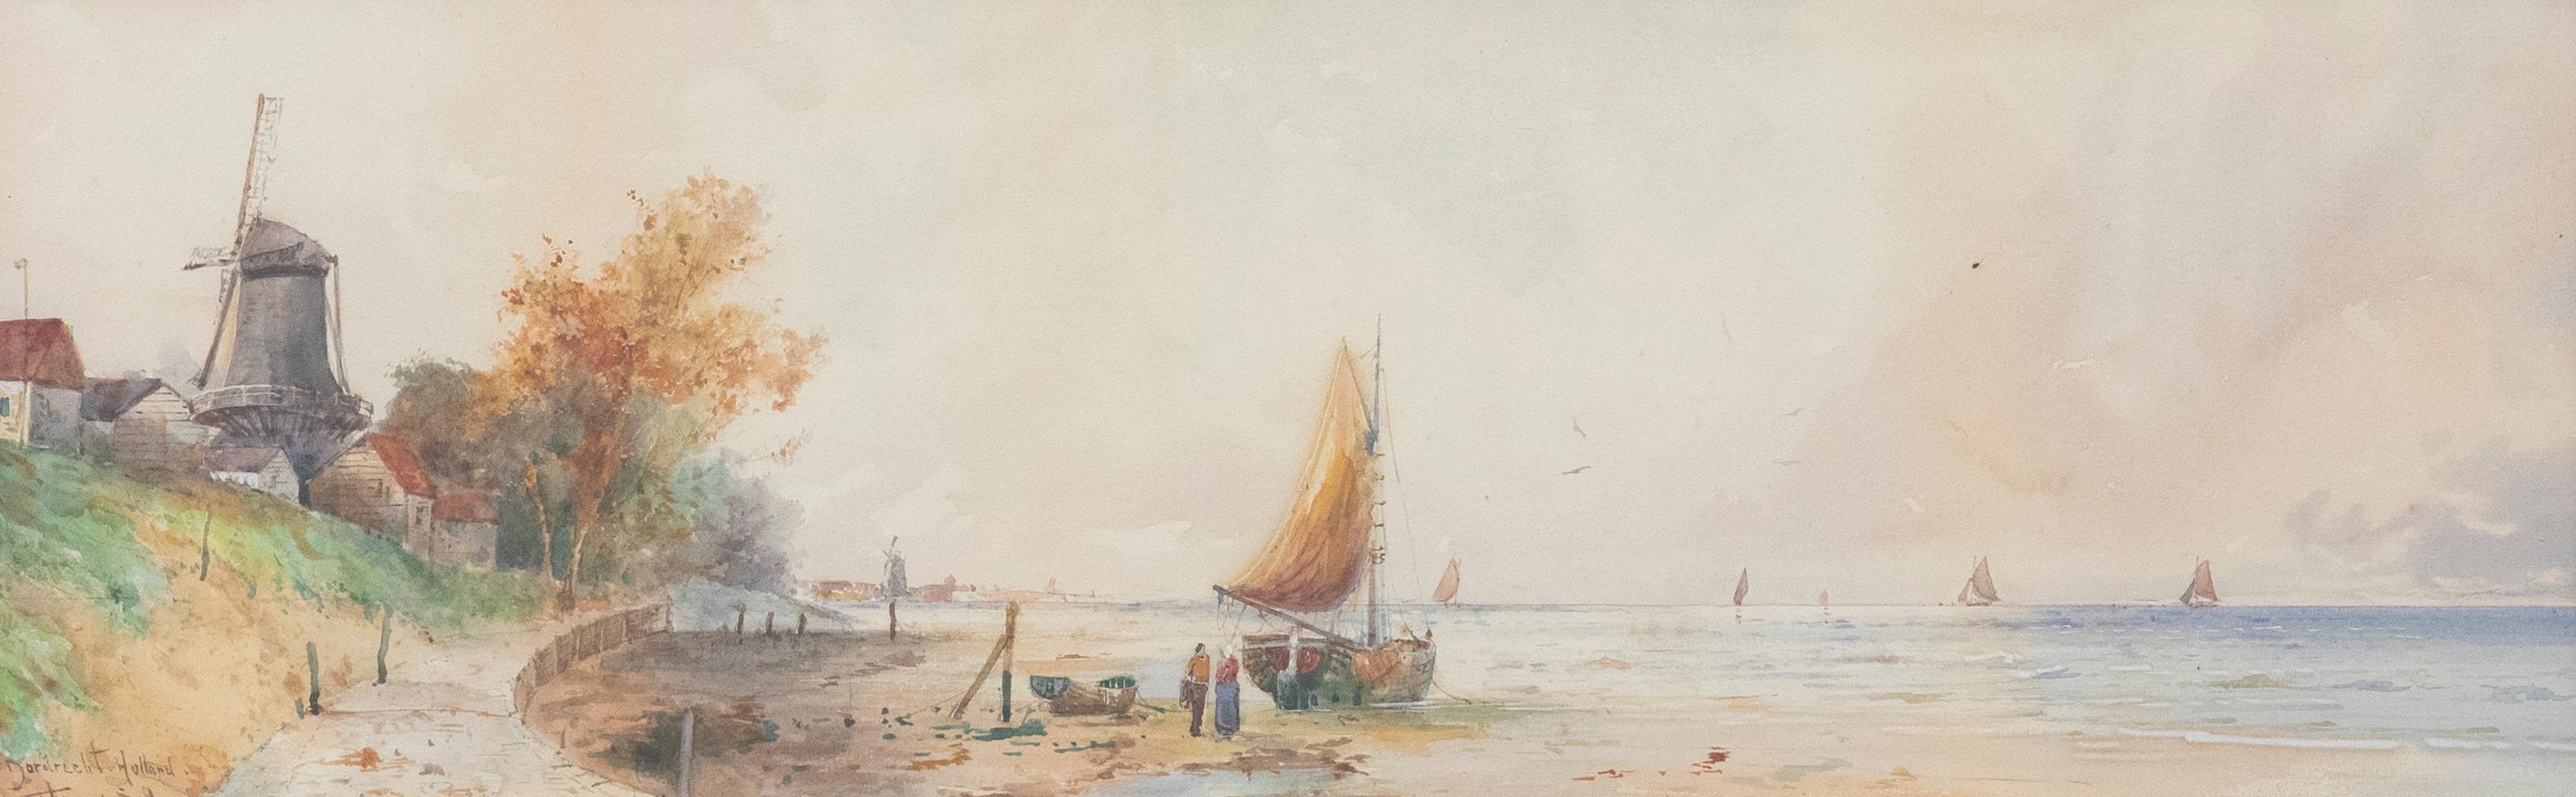 Thomas Sidney - Framed Early 20th Century Watercolour, Seascape off Dordrecht - Art by Thomas Sidney Cooper